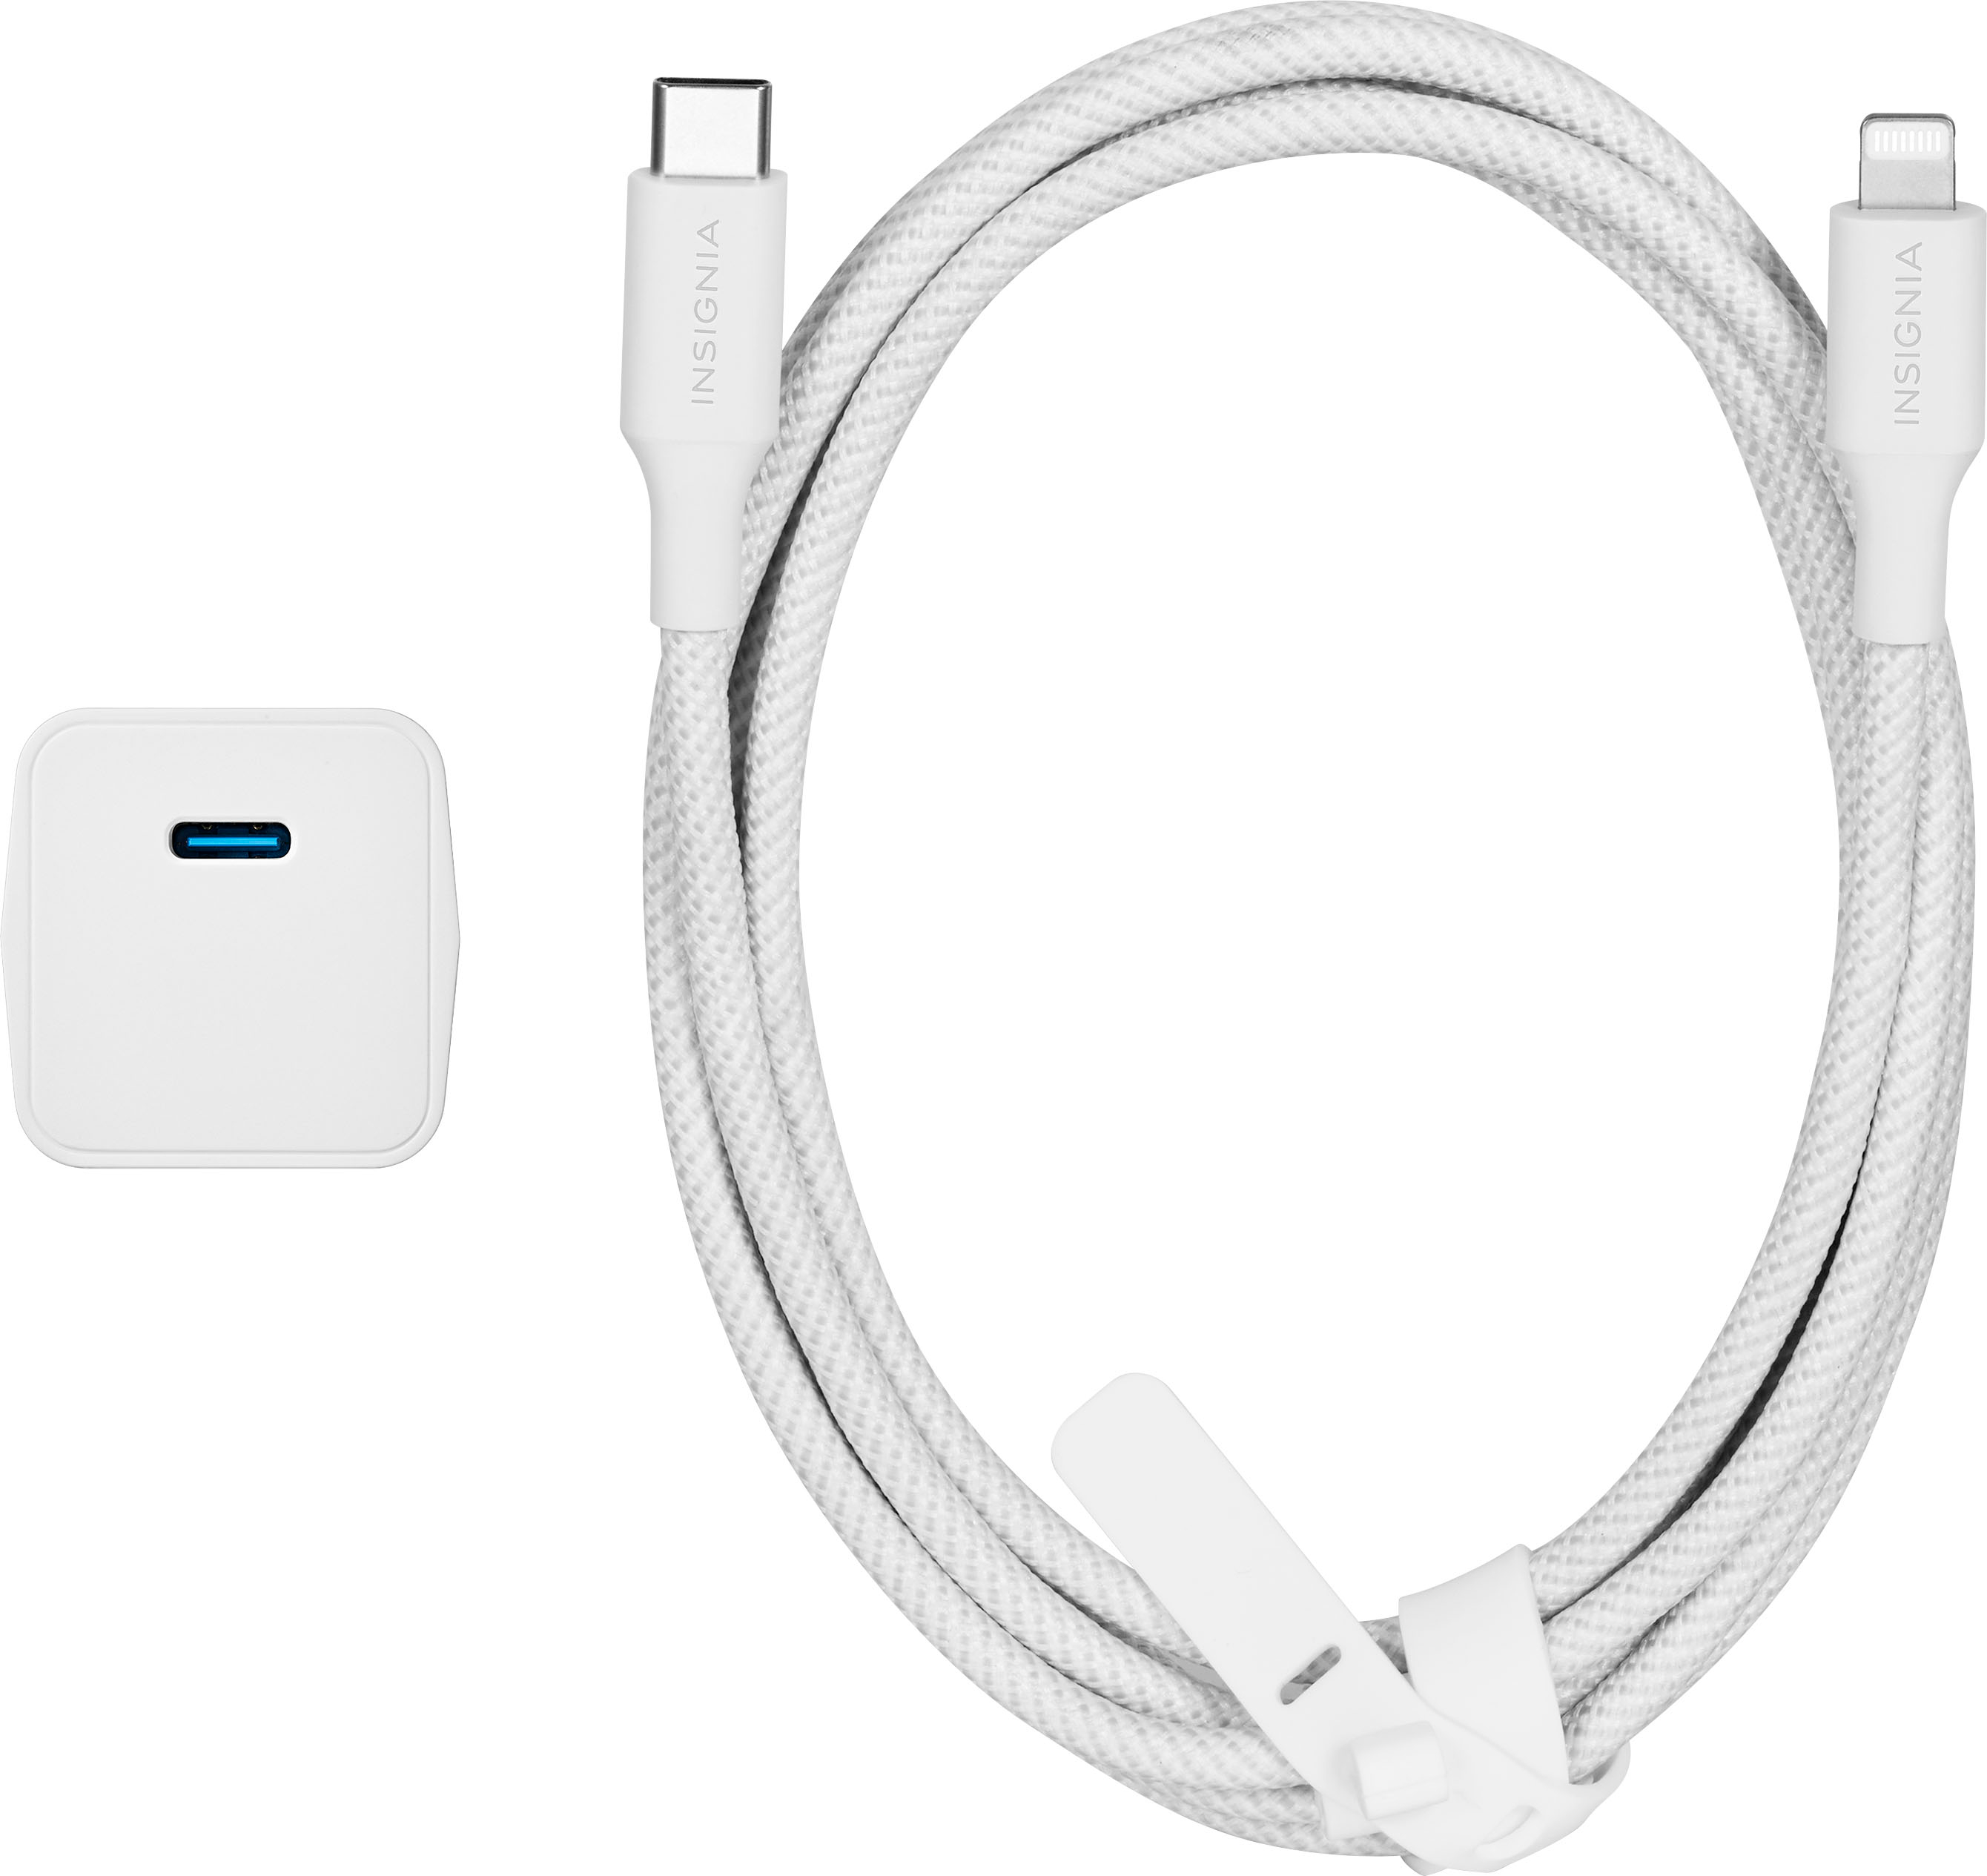 Apple iPhone 13 Pro Max Charger (USB-C Adapter and Cable) Price in